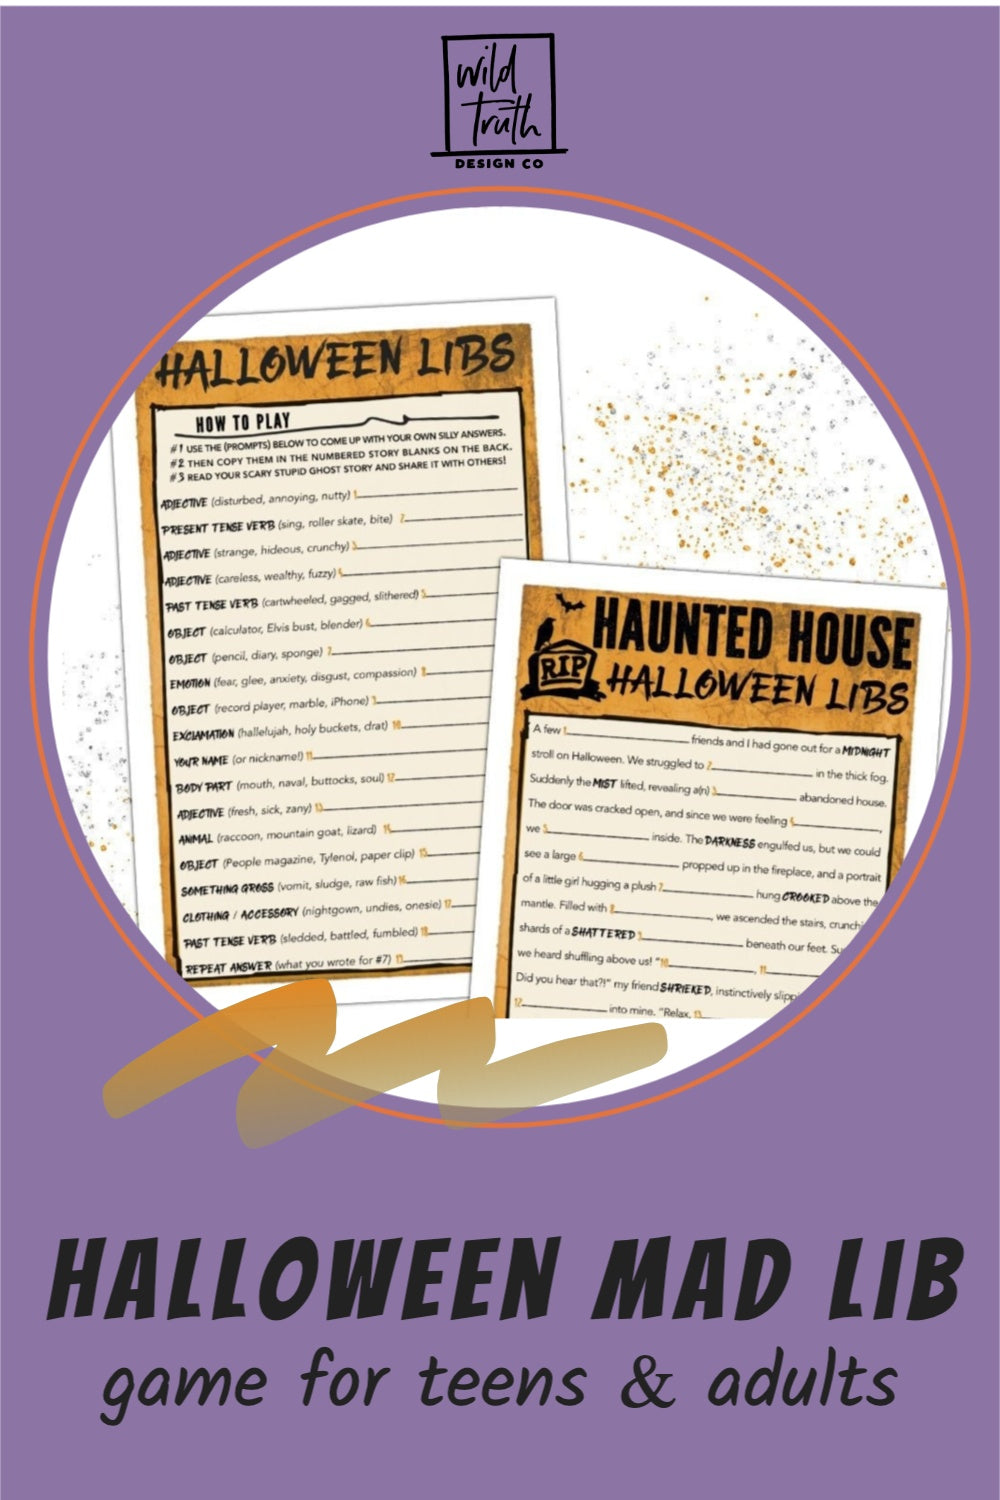 Haunted House Halloween Mad Lib Game For Teens & Adults